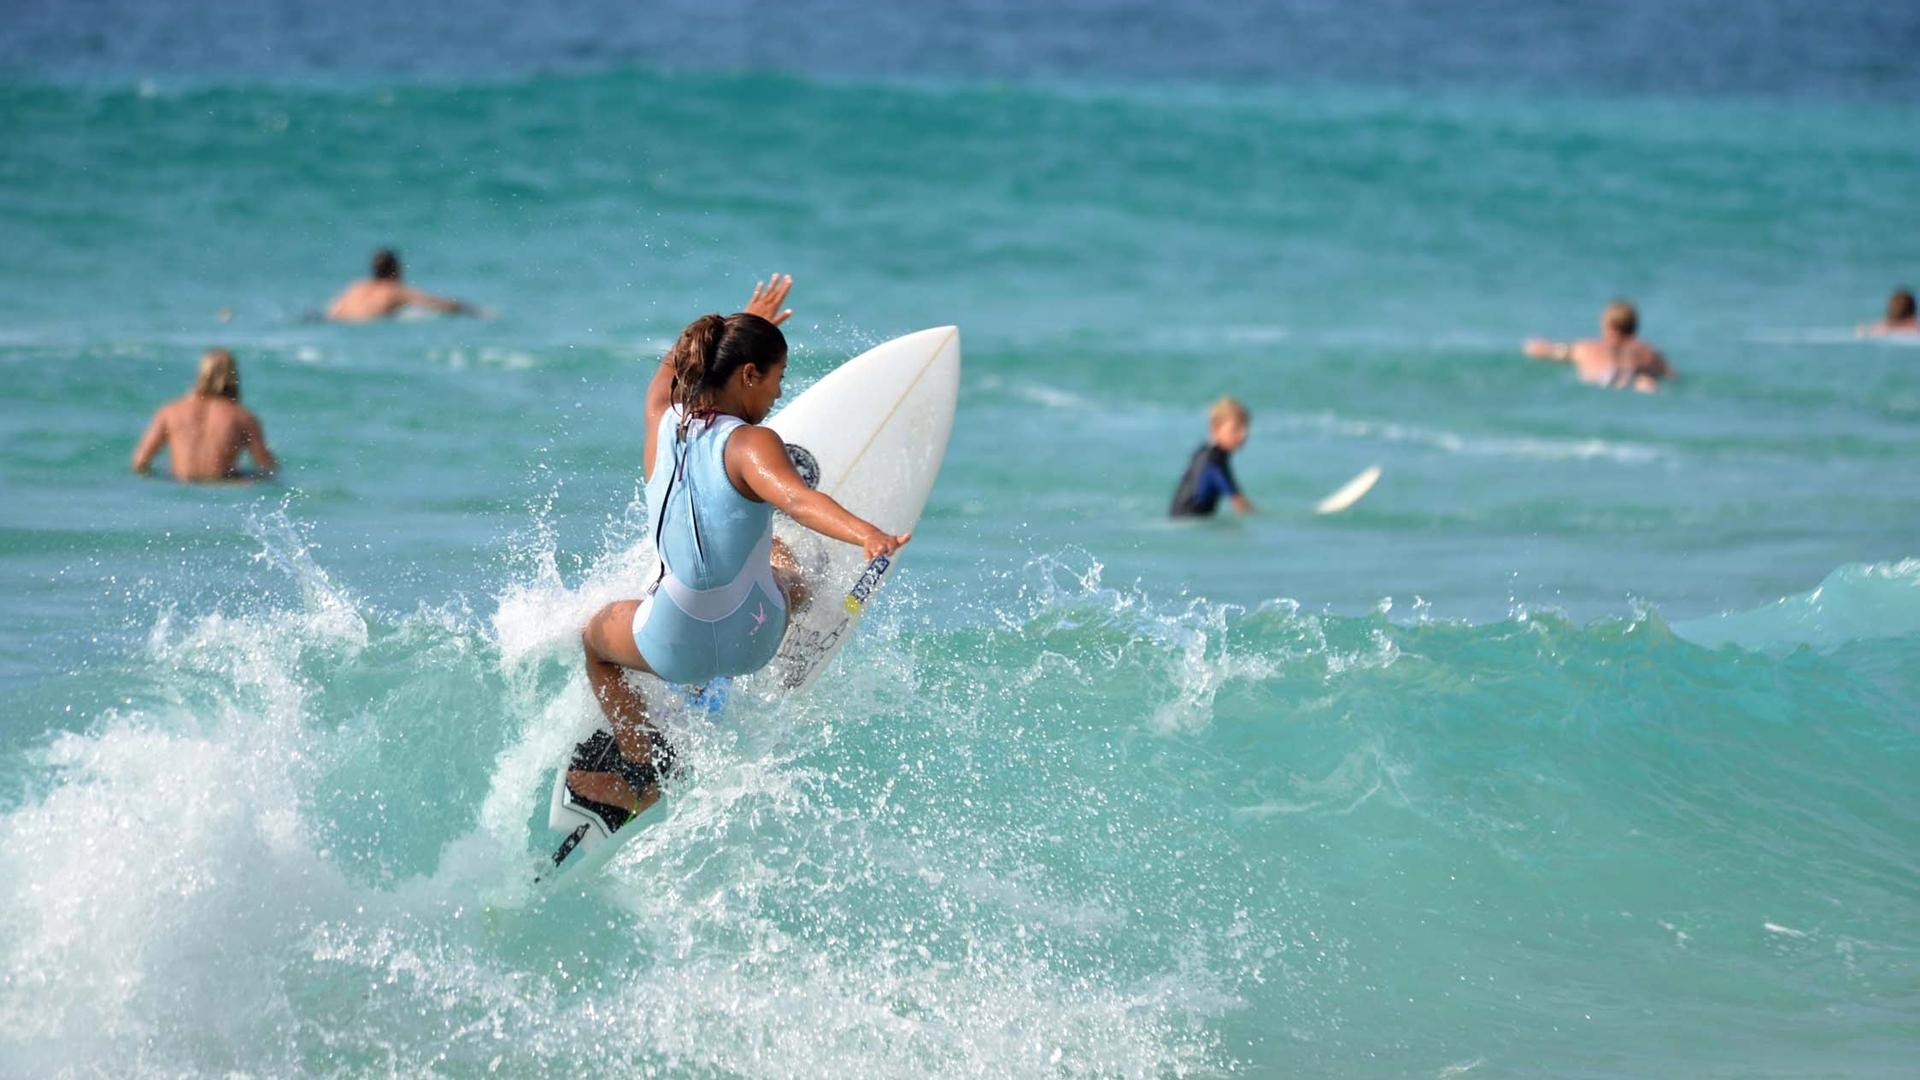 Surfing: Recreational outdoor activity and sport in the Hawaiian Islands, Water sports. 1920x1080 Full HD Wallpaper.